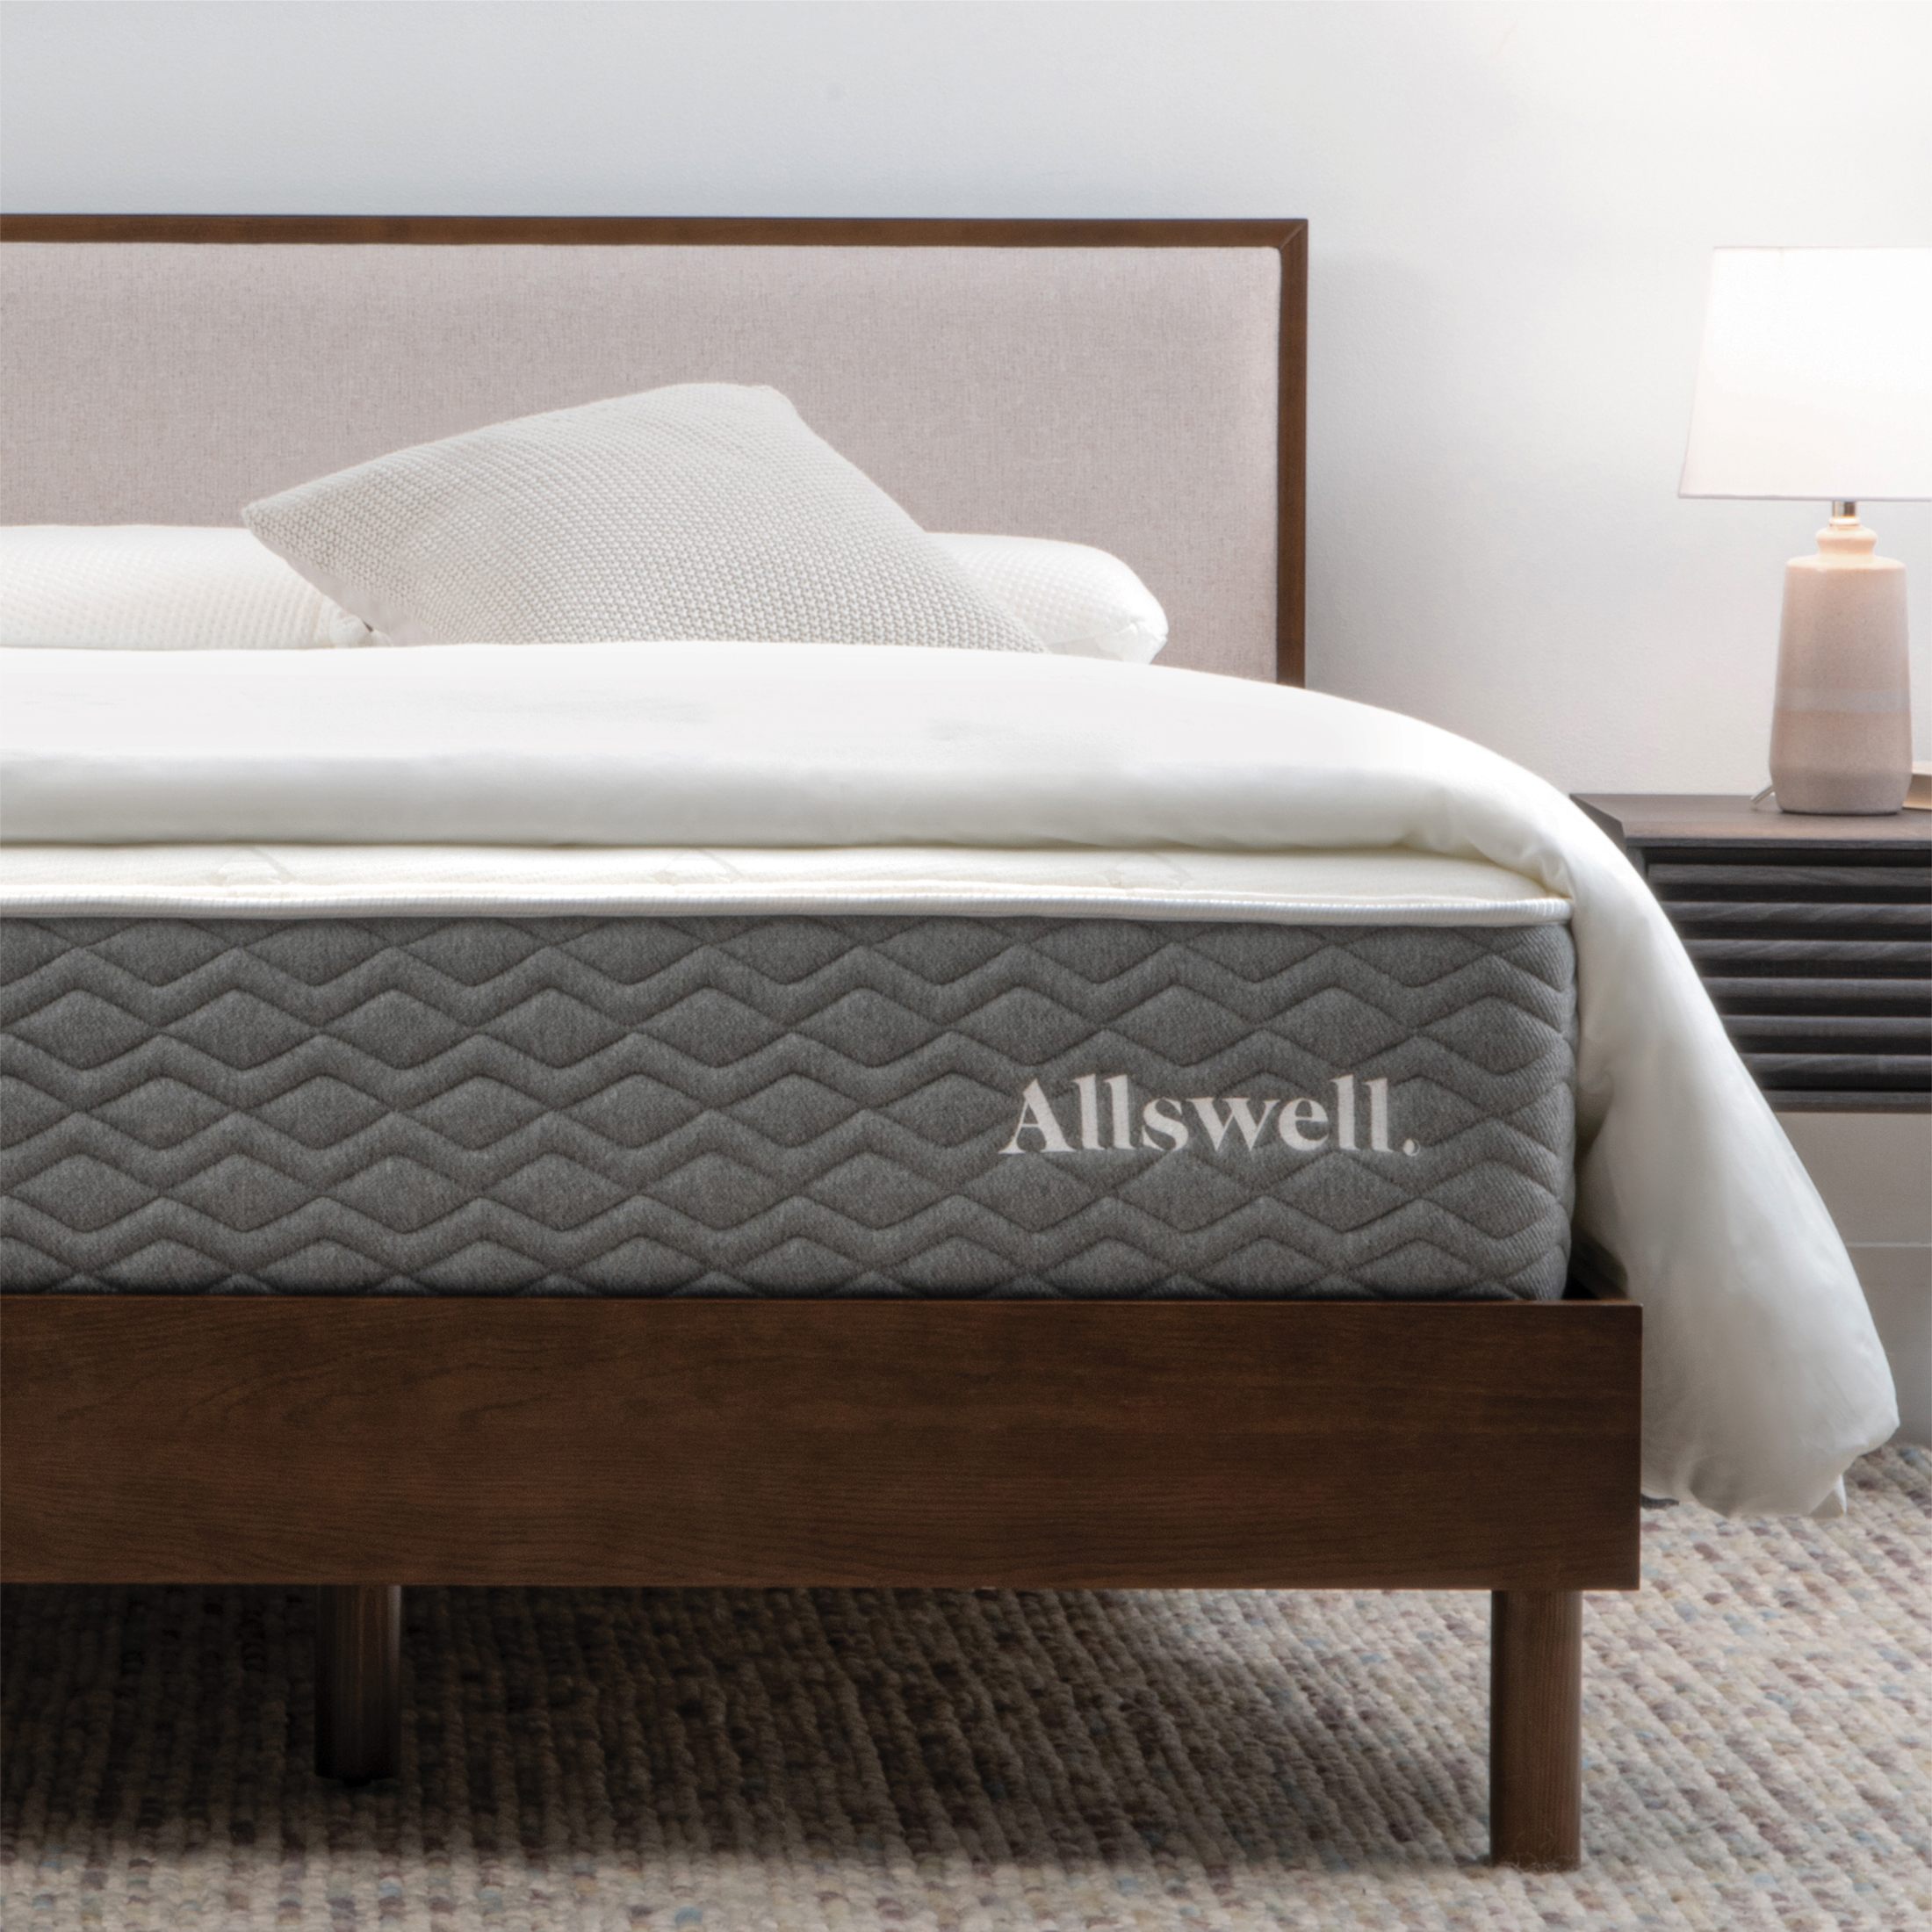 The Allswell Luxe 12" Bed in a Box Hybrid Mattress, Queen - image 1 of 7